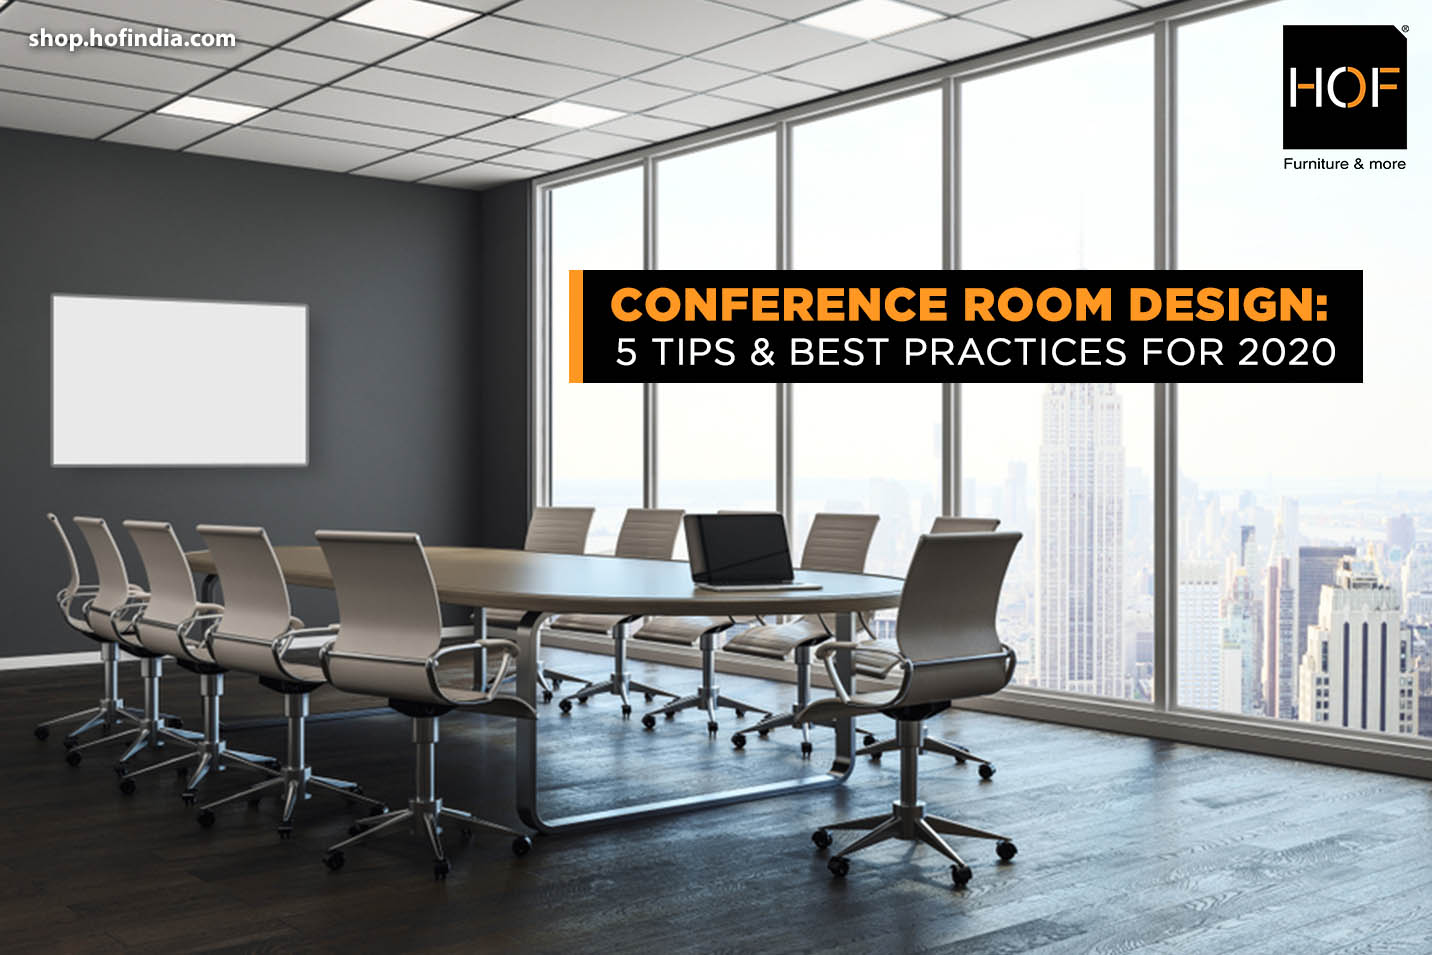 Conference room design 5 tips & best practices for 2020